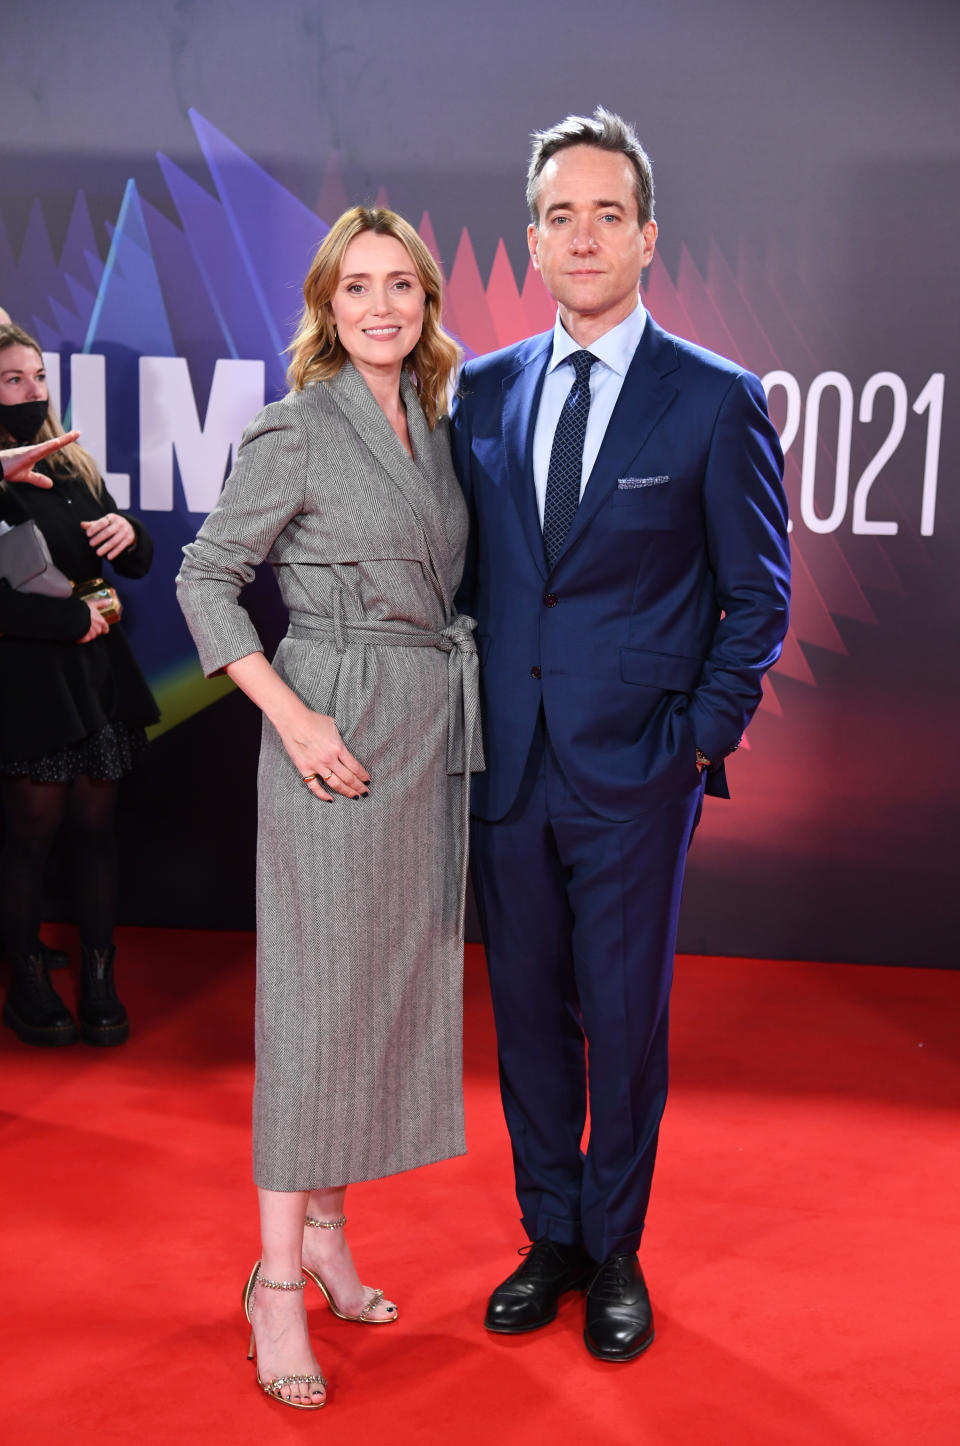 The actress has been married to Matthew Macfayden since 2004. (Getty Images)